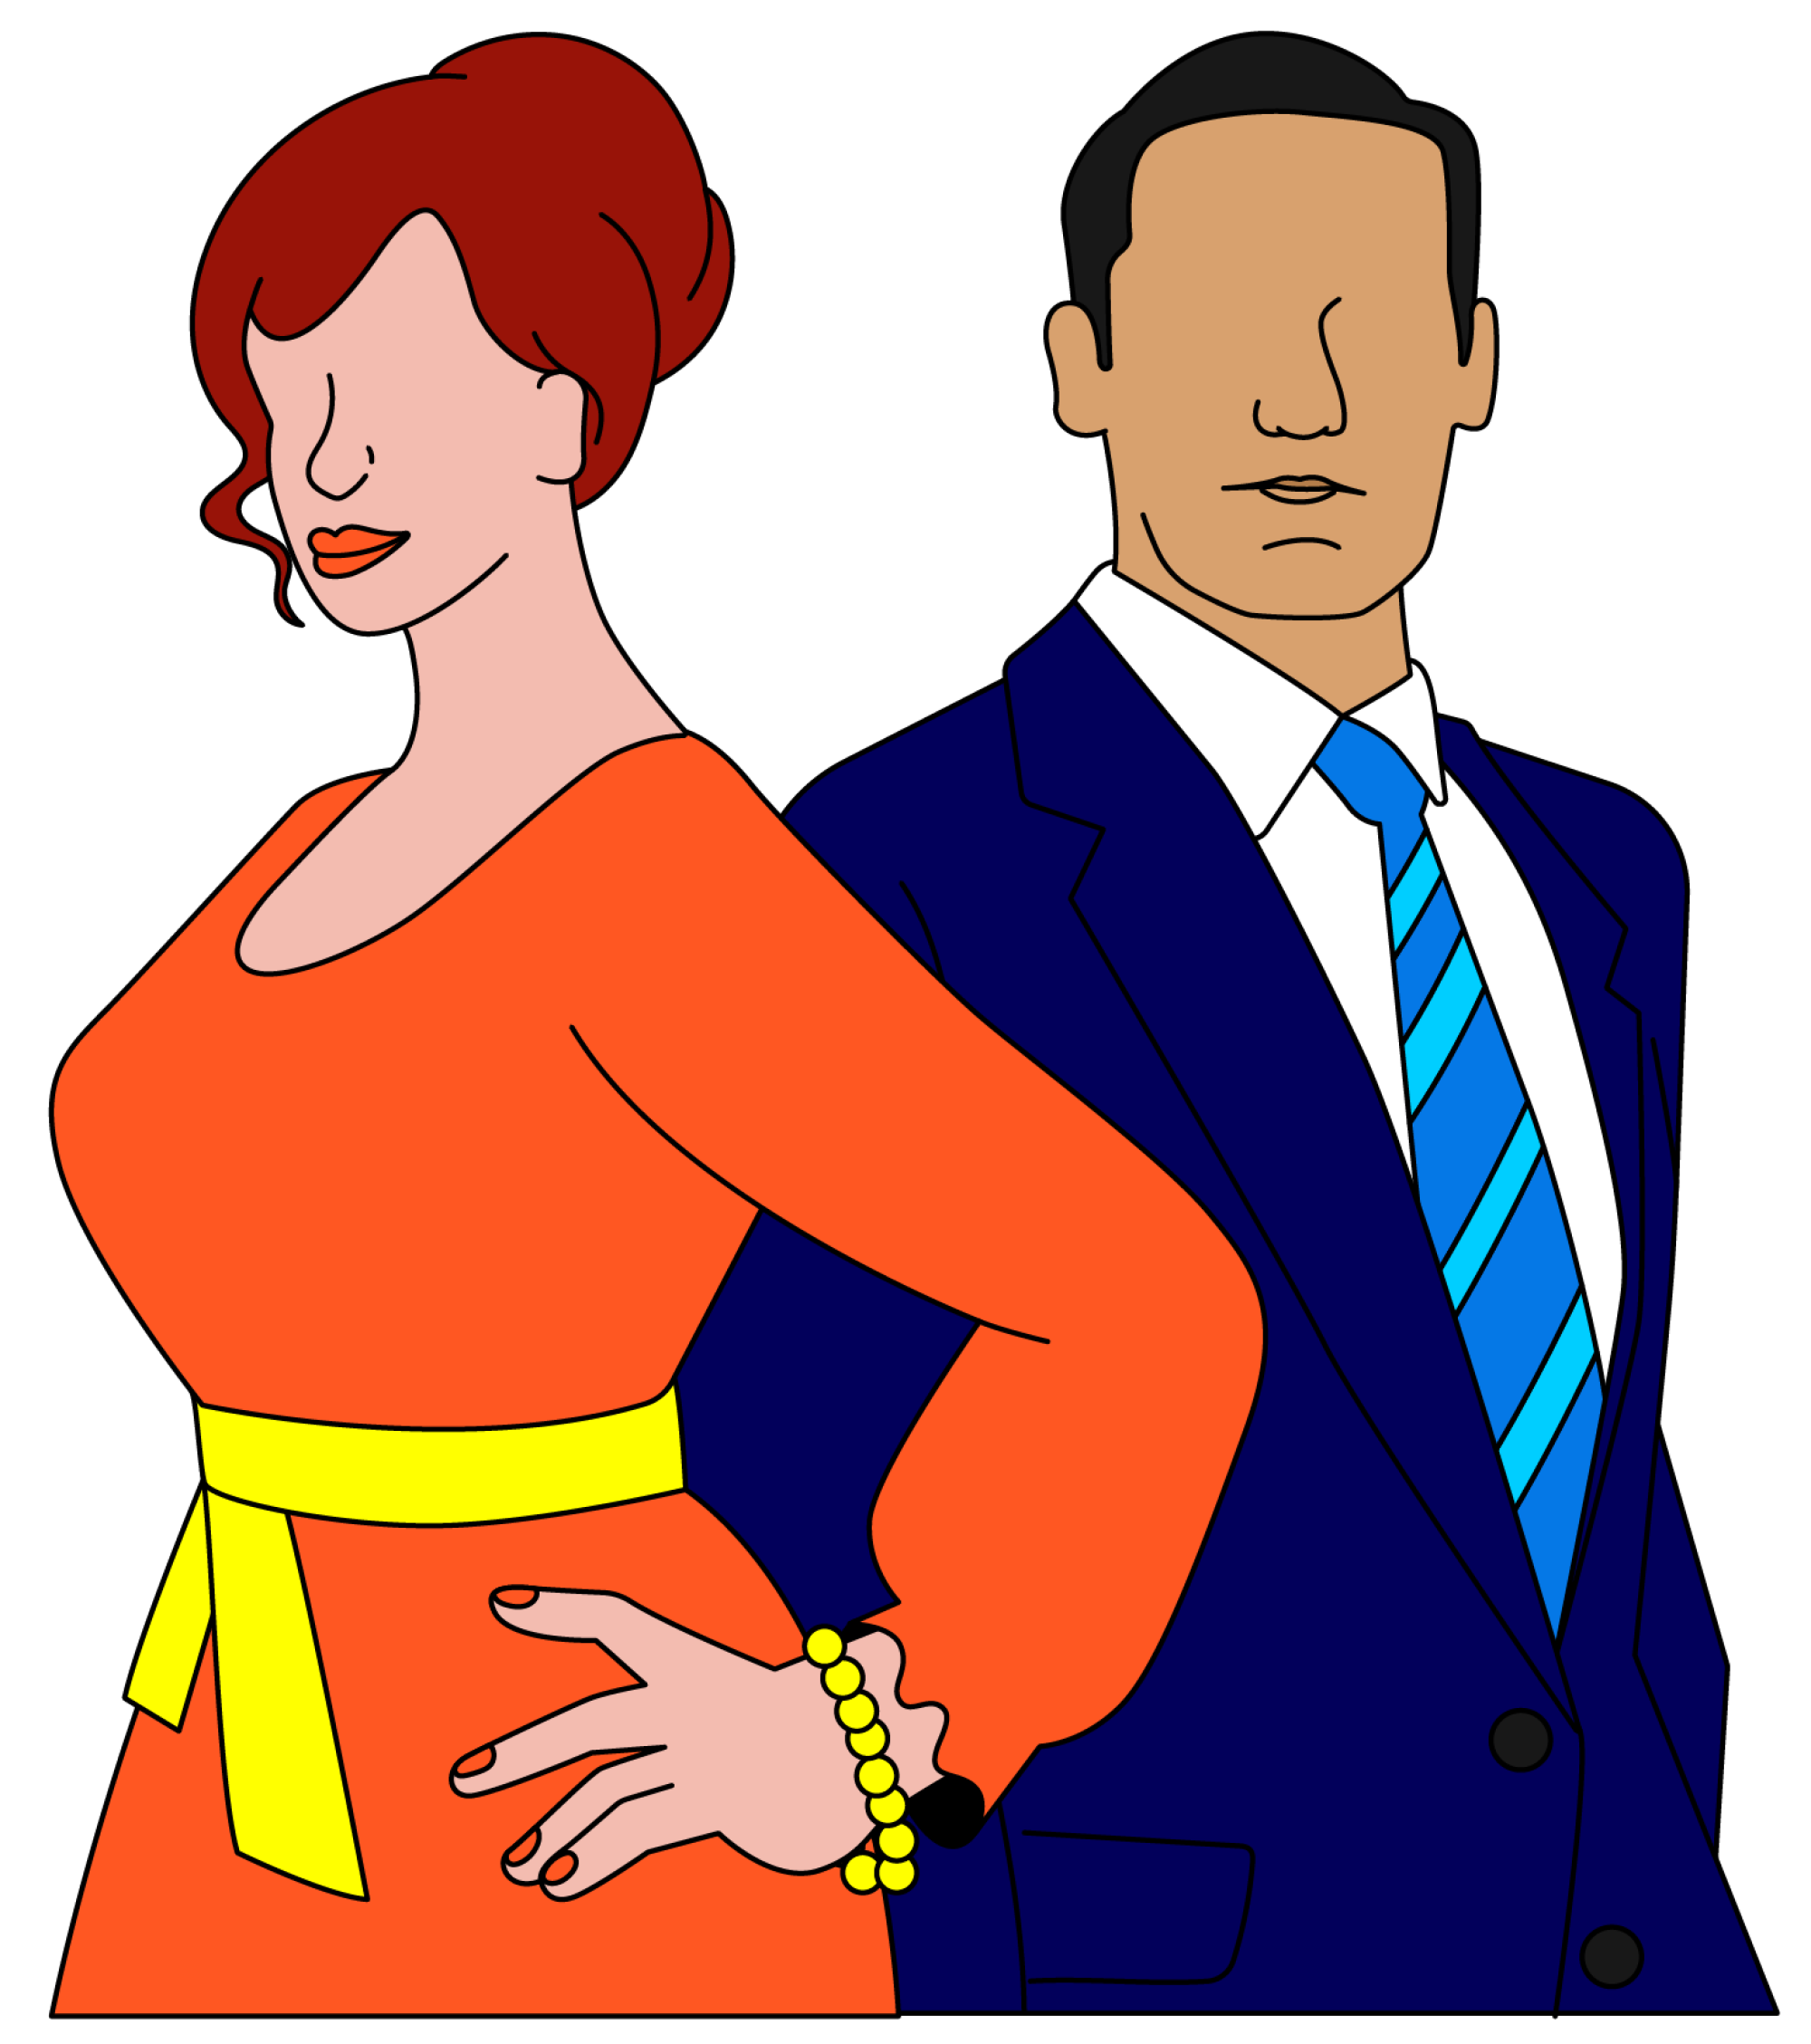 Illustration of Joan and Don from "Mad Men"